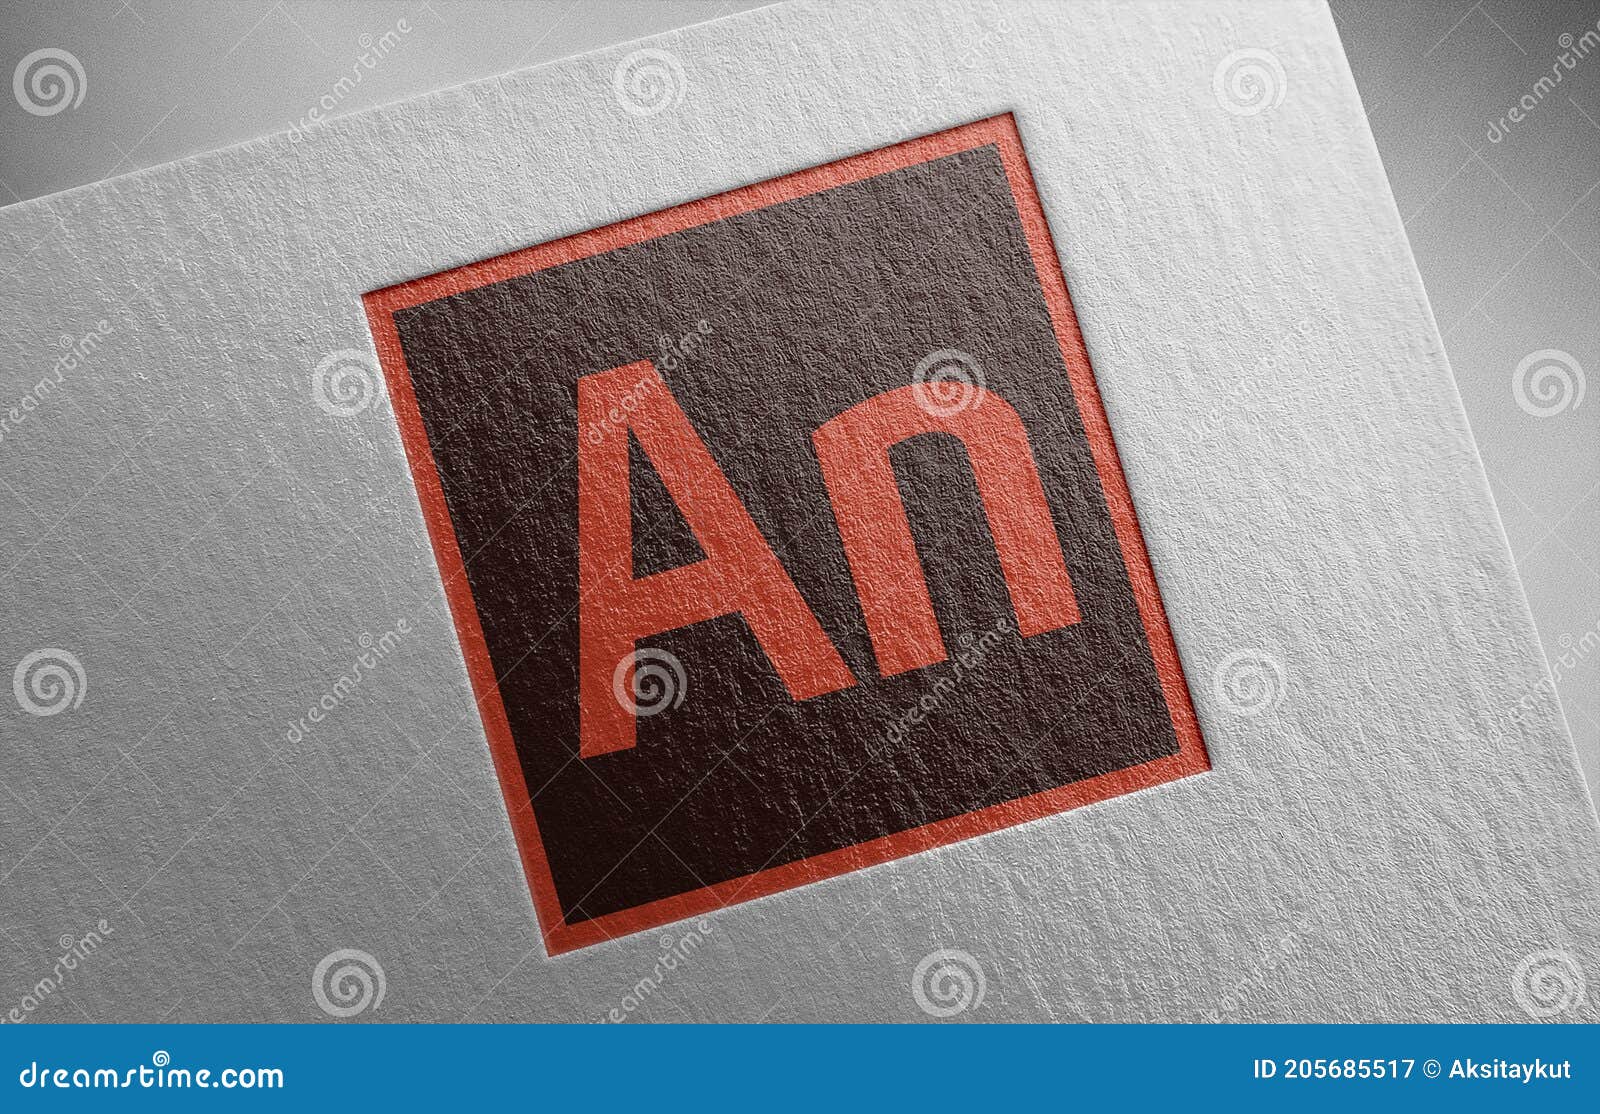 Adobe-animate_1 on Paper Texture Editorial Photography - Image of vector,  animate: 205685517